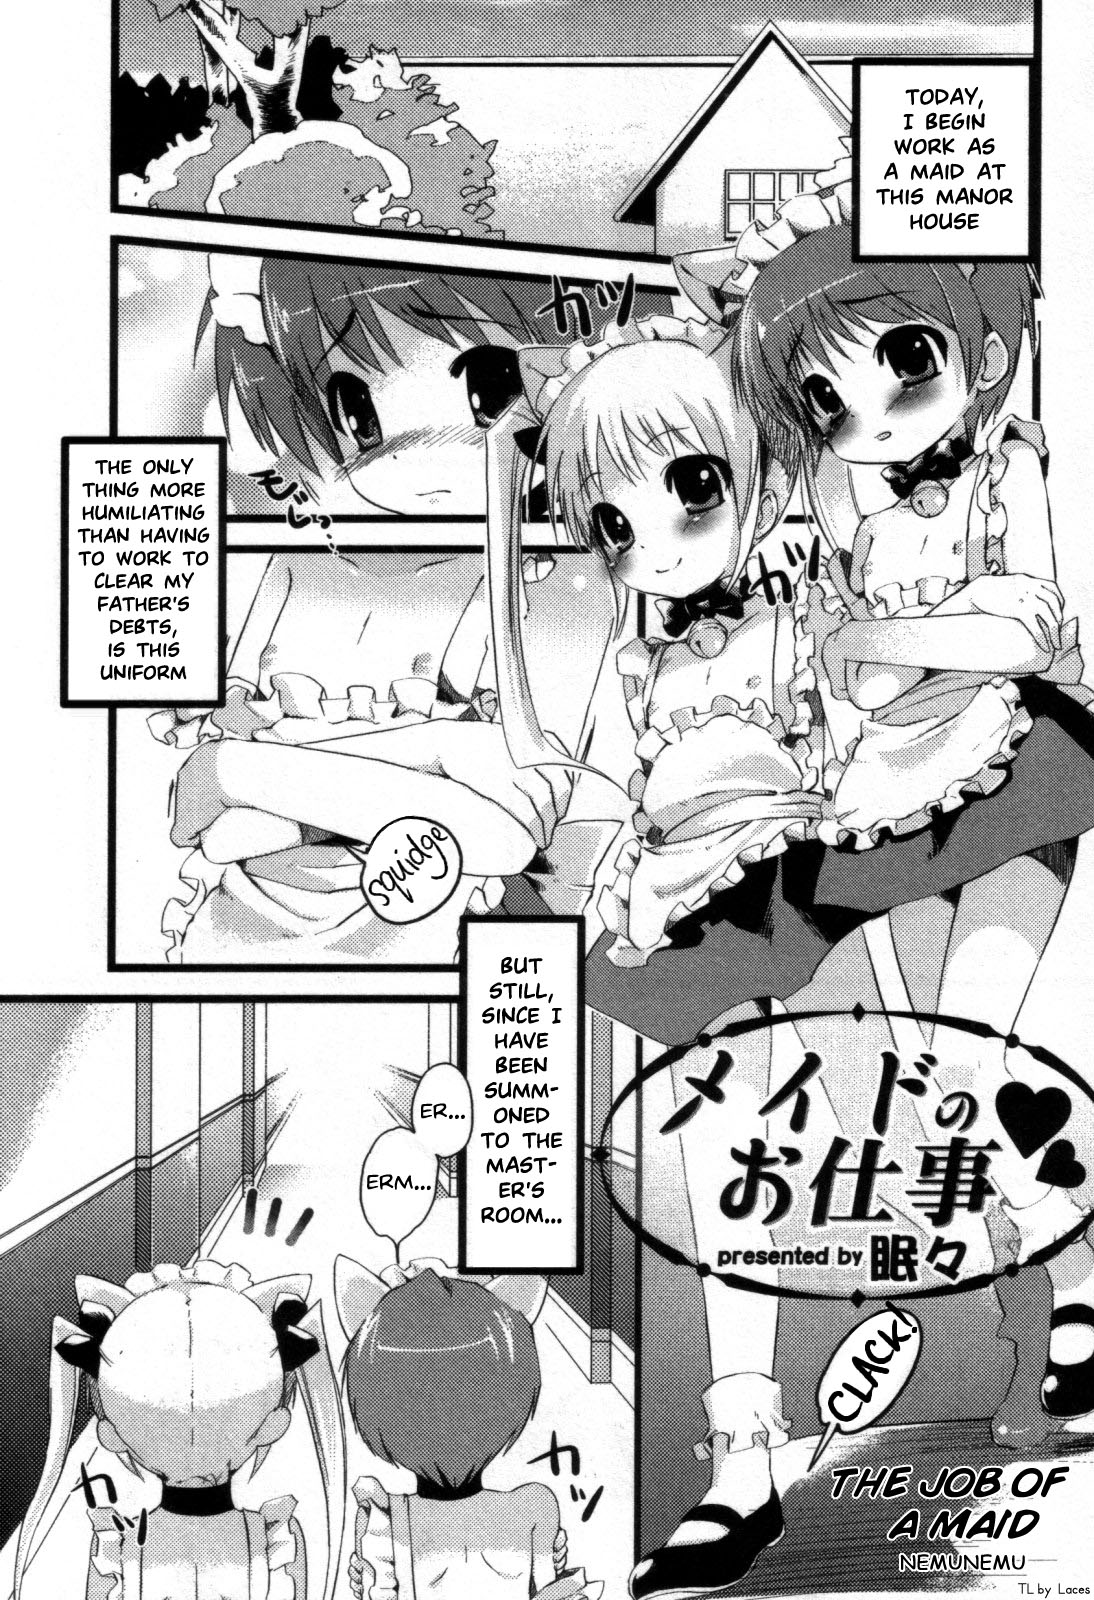 [NemuNemu] The Job of a Maid (Eng) page 1 full